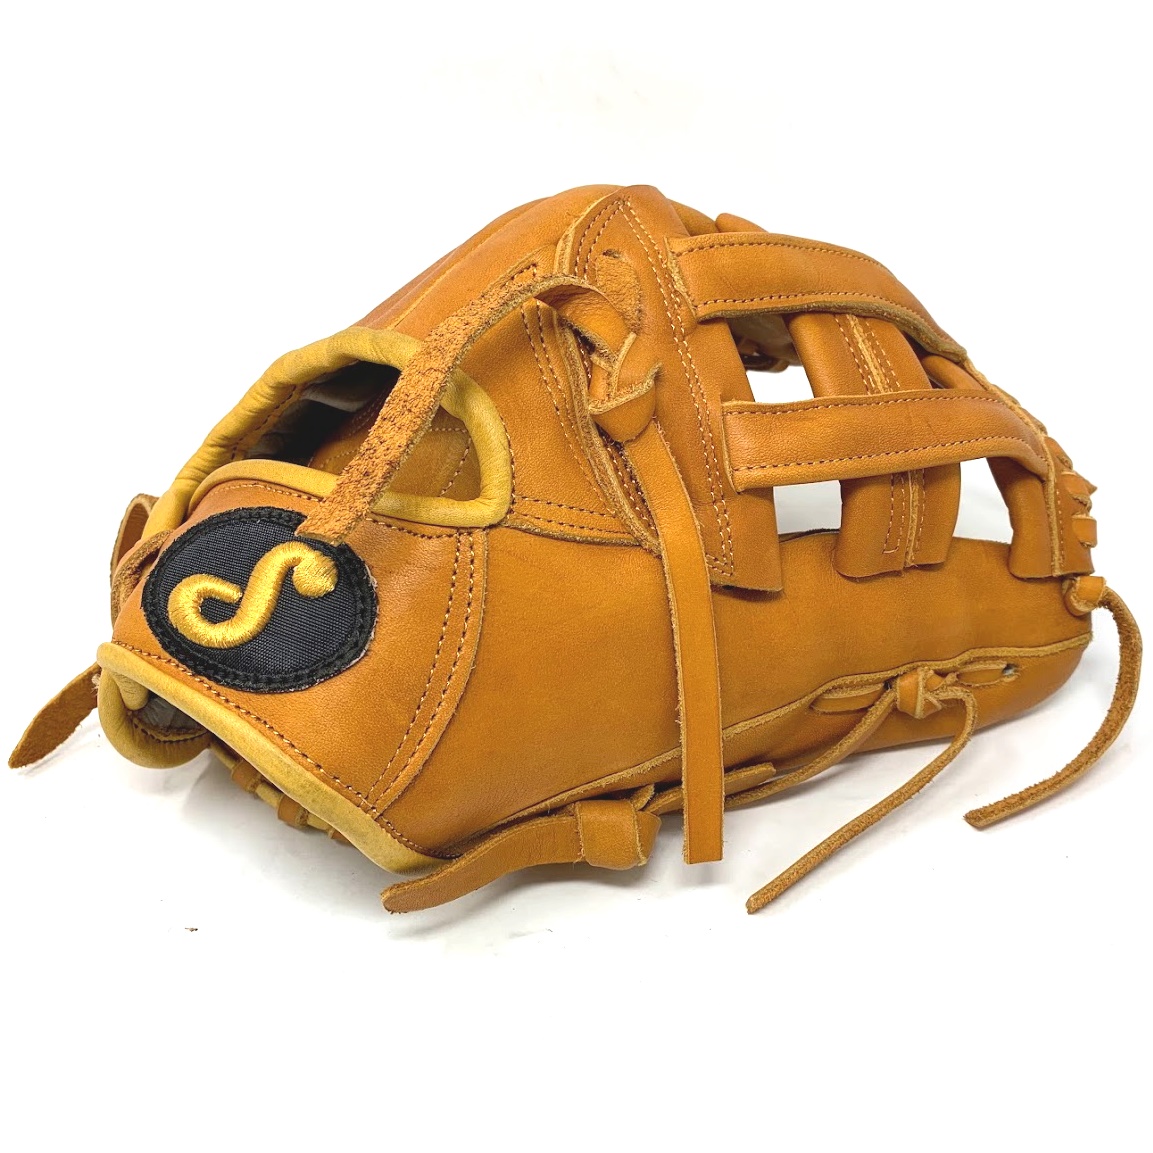 soto-honey-12-inch-h-web-baseball-glove-right-hand-throw S20-12-HC-H-RightHandThrow soto  Made in Mexico    The Soto family has been making gloves